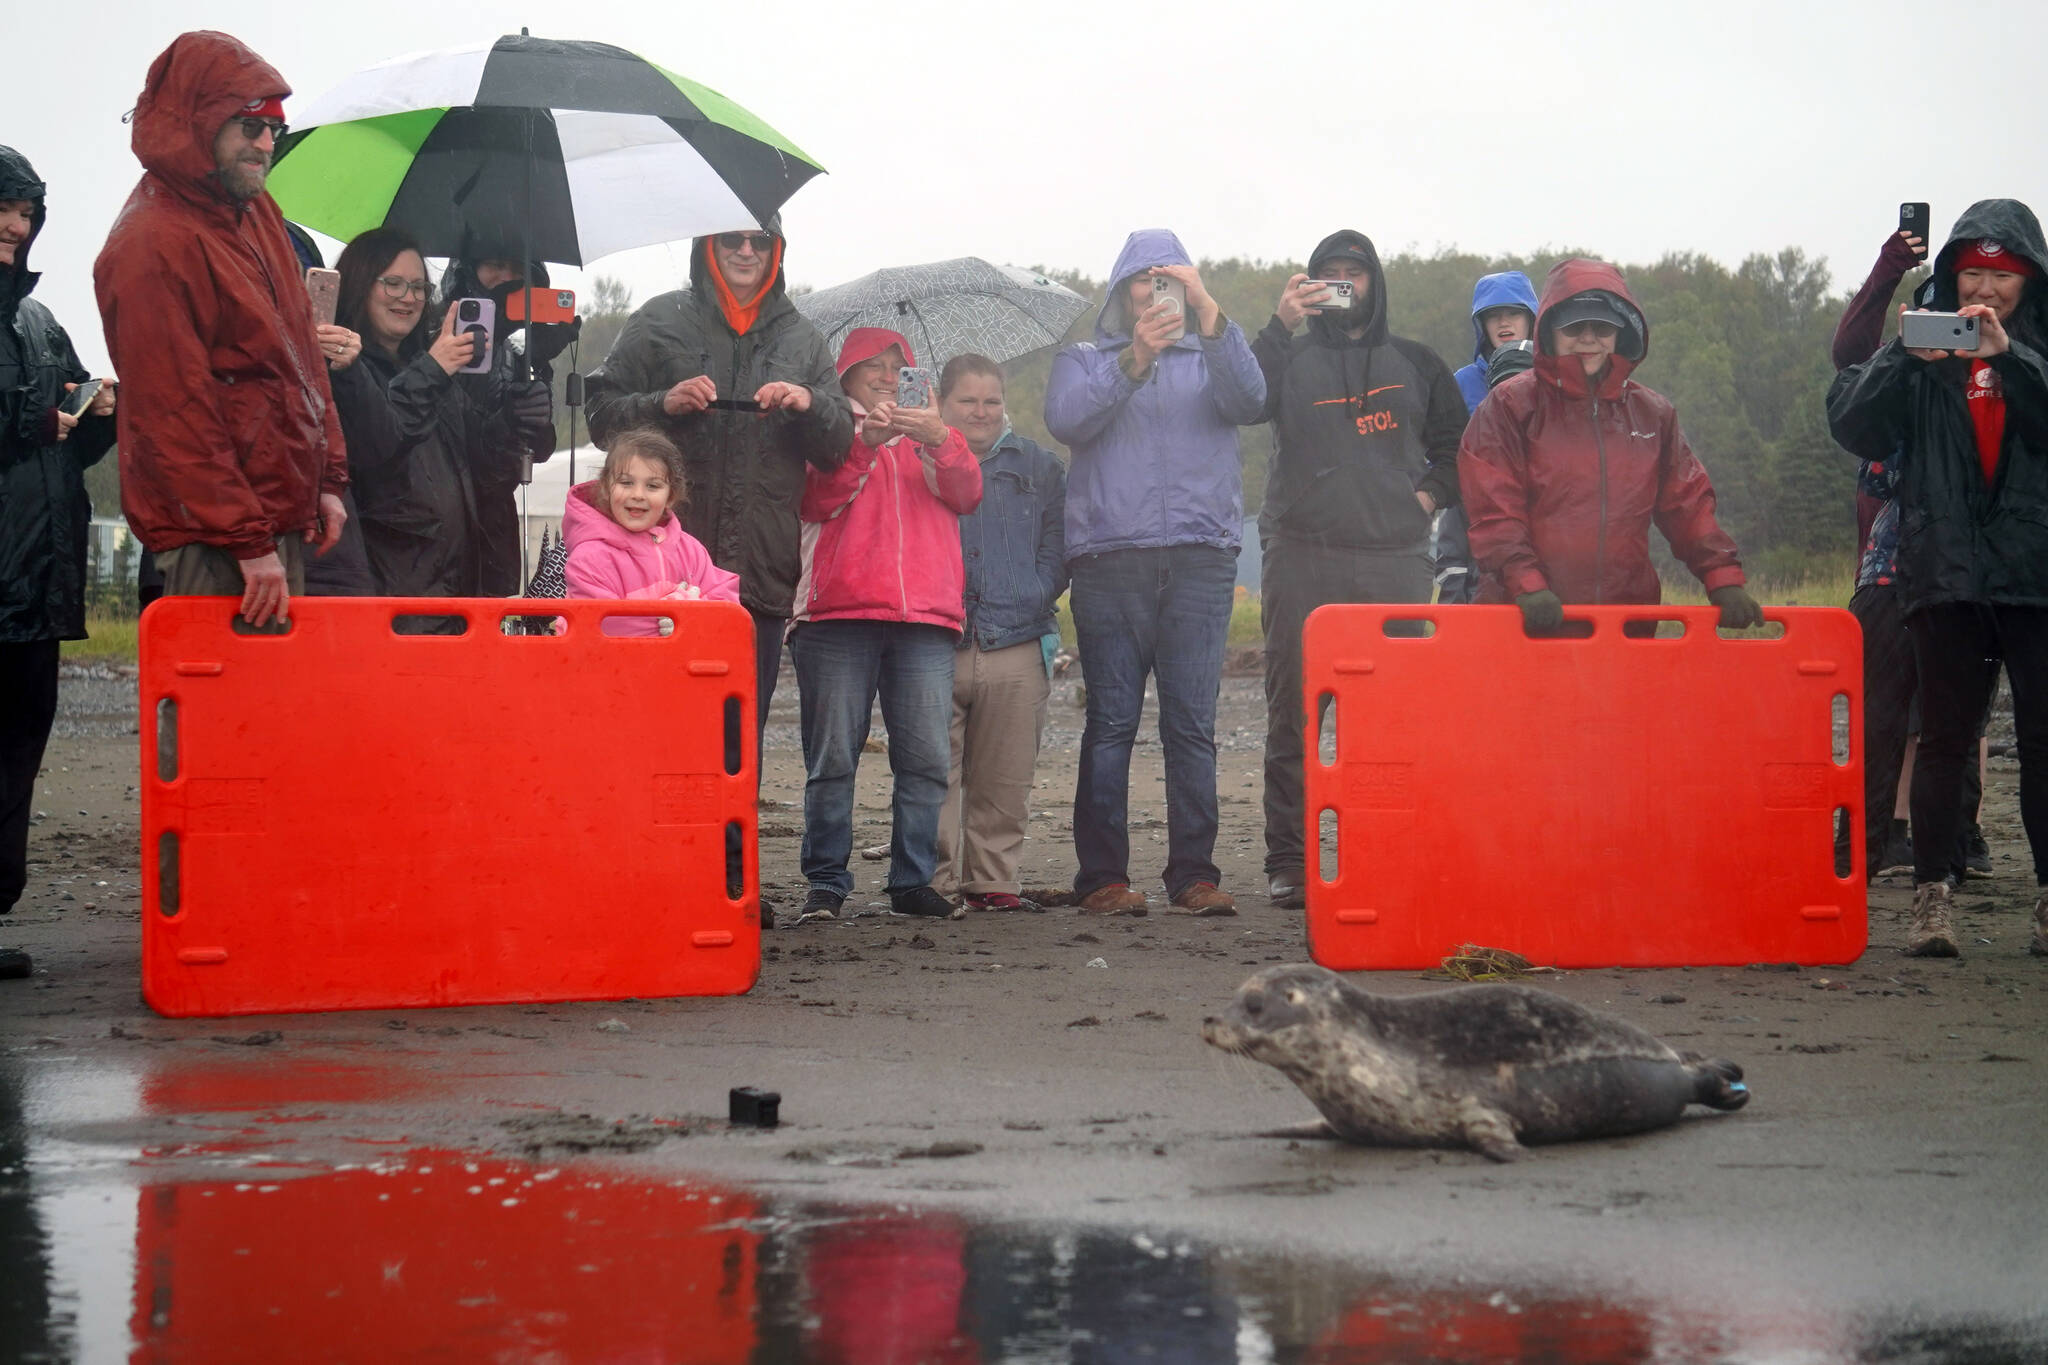 A harbor seal rescued earlier this year by the Alaska SeaLife Center, Darth Tater, enters the waters of Cook Inlet before crowds and cameras on the Kenai Beach in Kenai, Alaska, on Thursday, Sept. 7, 2023. (Jake Dye/Peninsula Clarion)